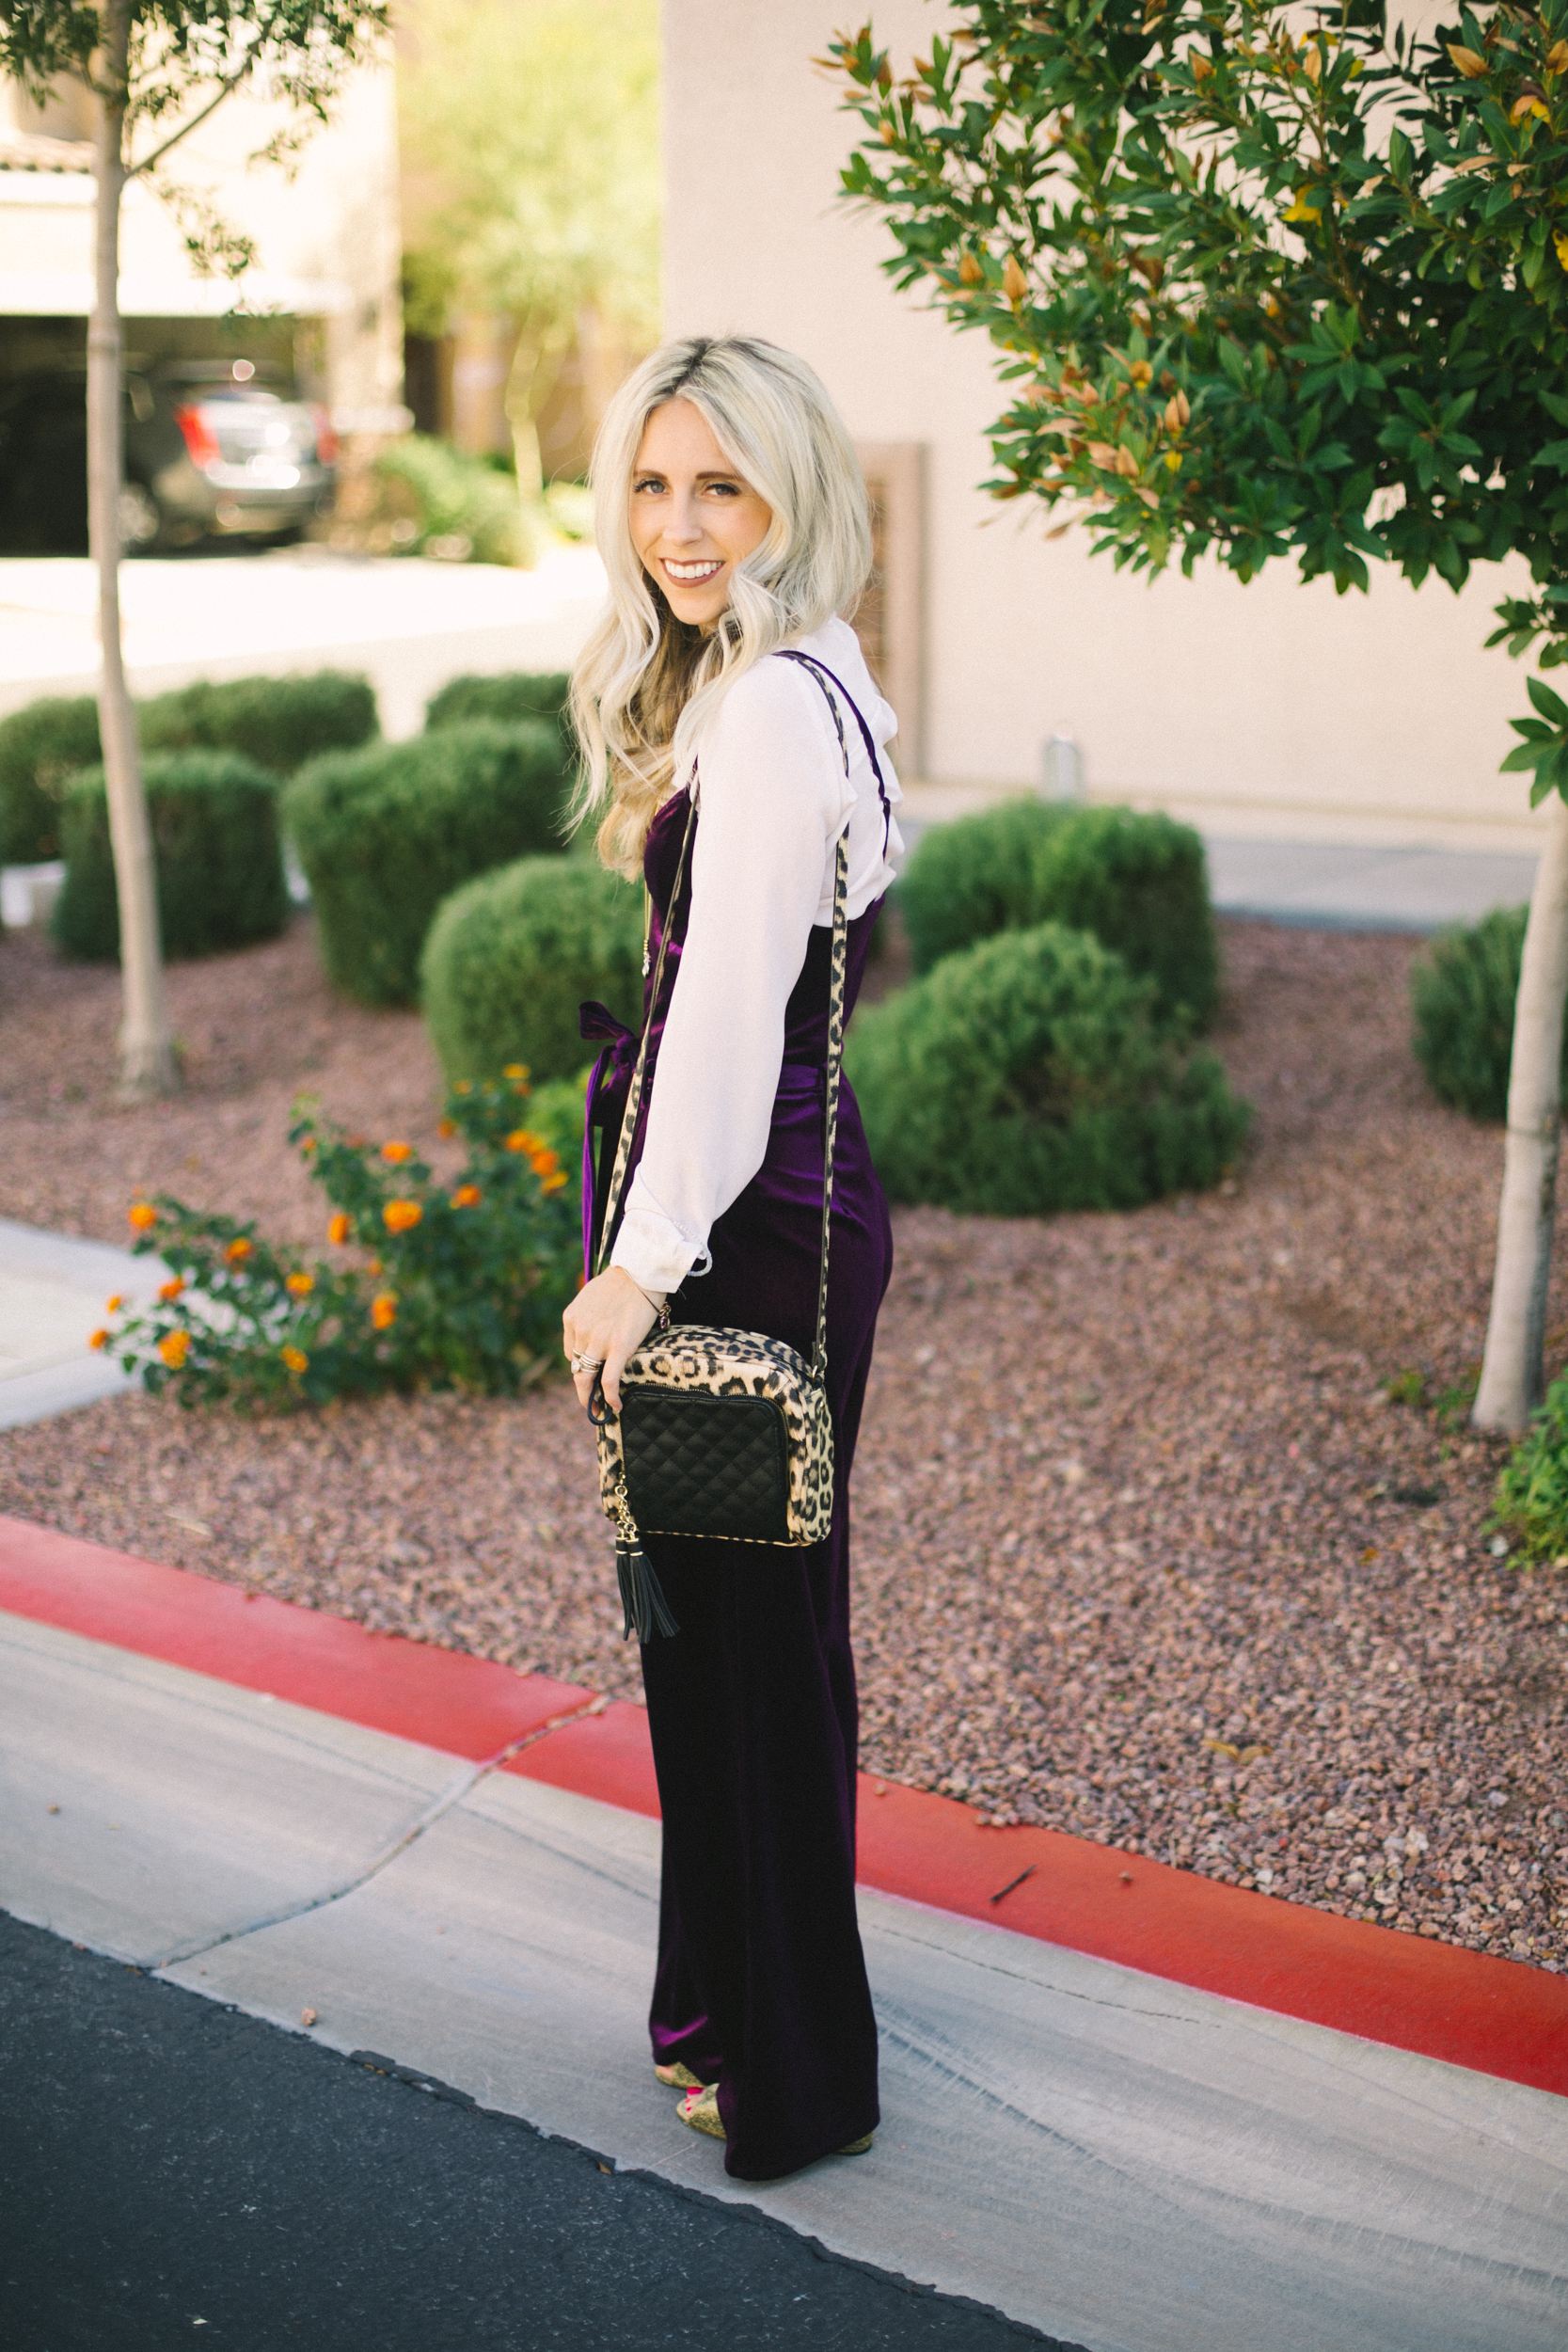 Holiday Attire by Las Vegas fashion bloggers Life of a Sister